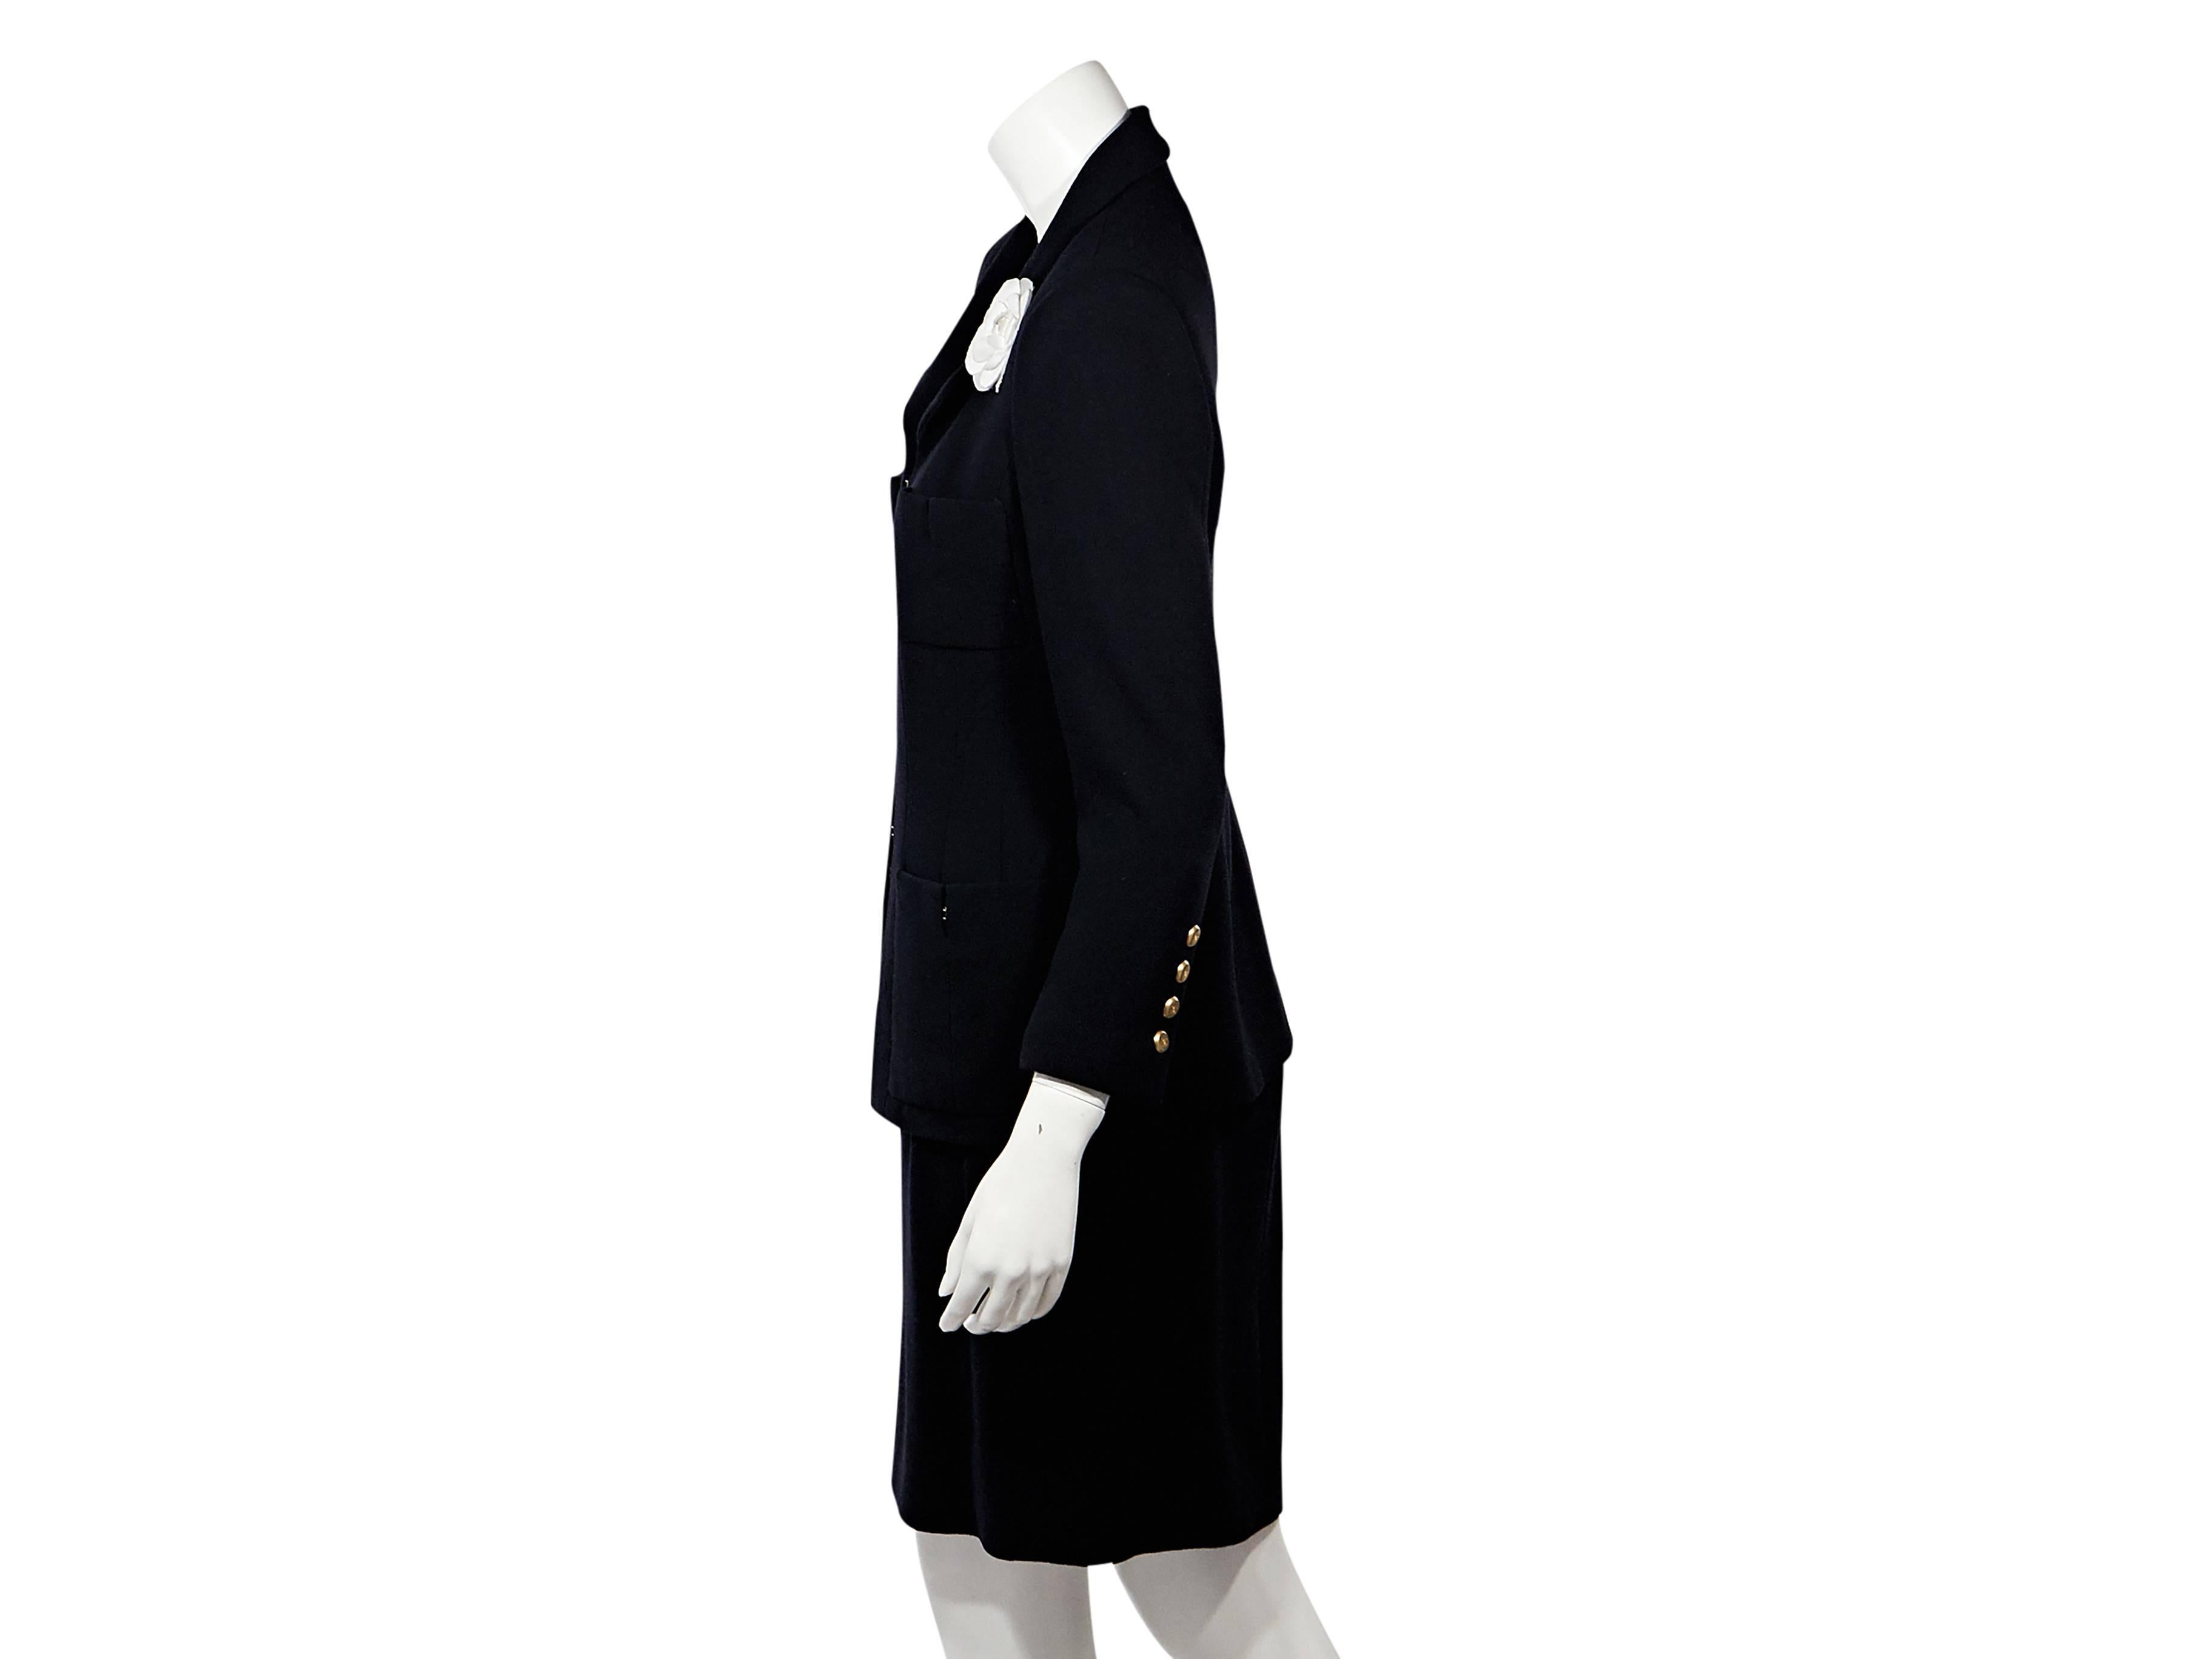 Product details: Navy wool skirt suit set by Chanel. Accented with a white floral applique. Notched lapels. Long sleeves. Hook-front closure. Four front patch pockets. Four-button detail at cuffs. Matching skirt. Banded waist.
Condition: Very good.